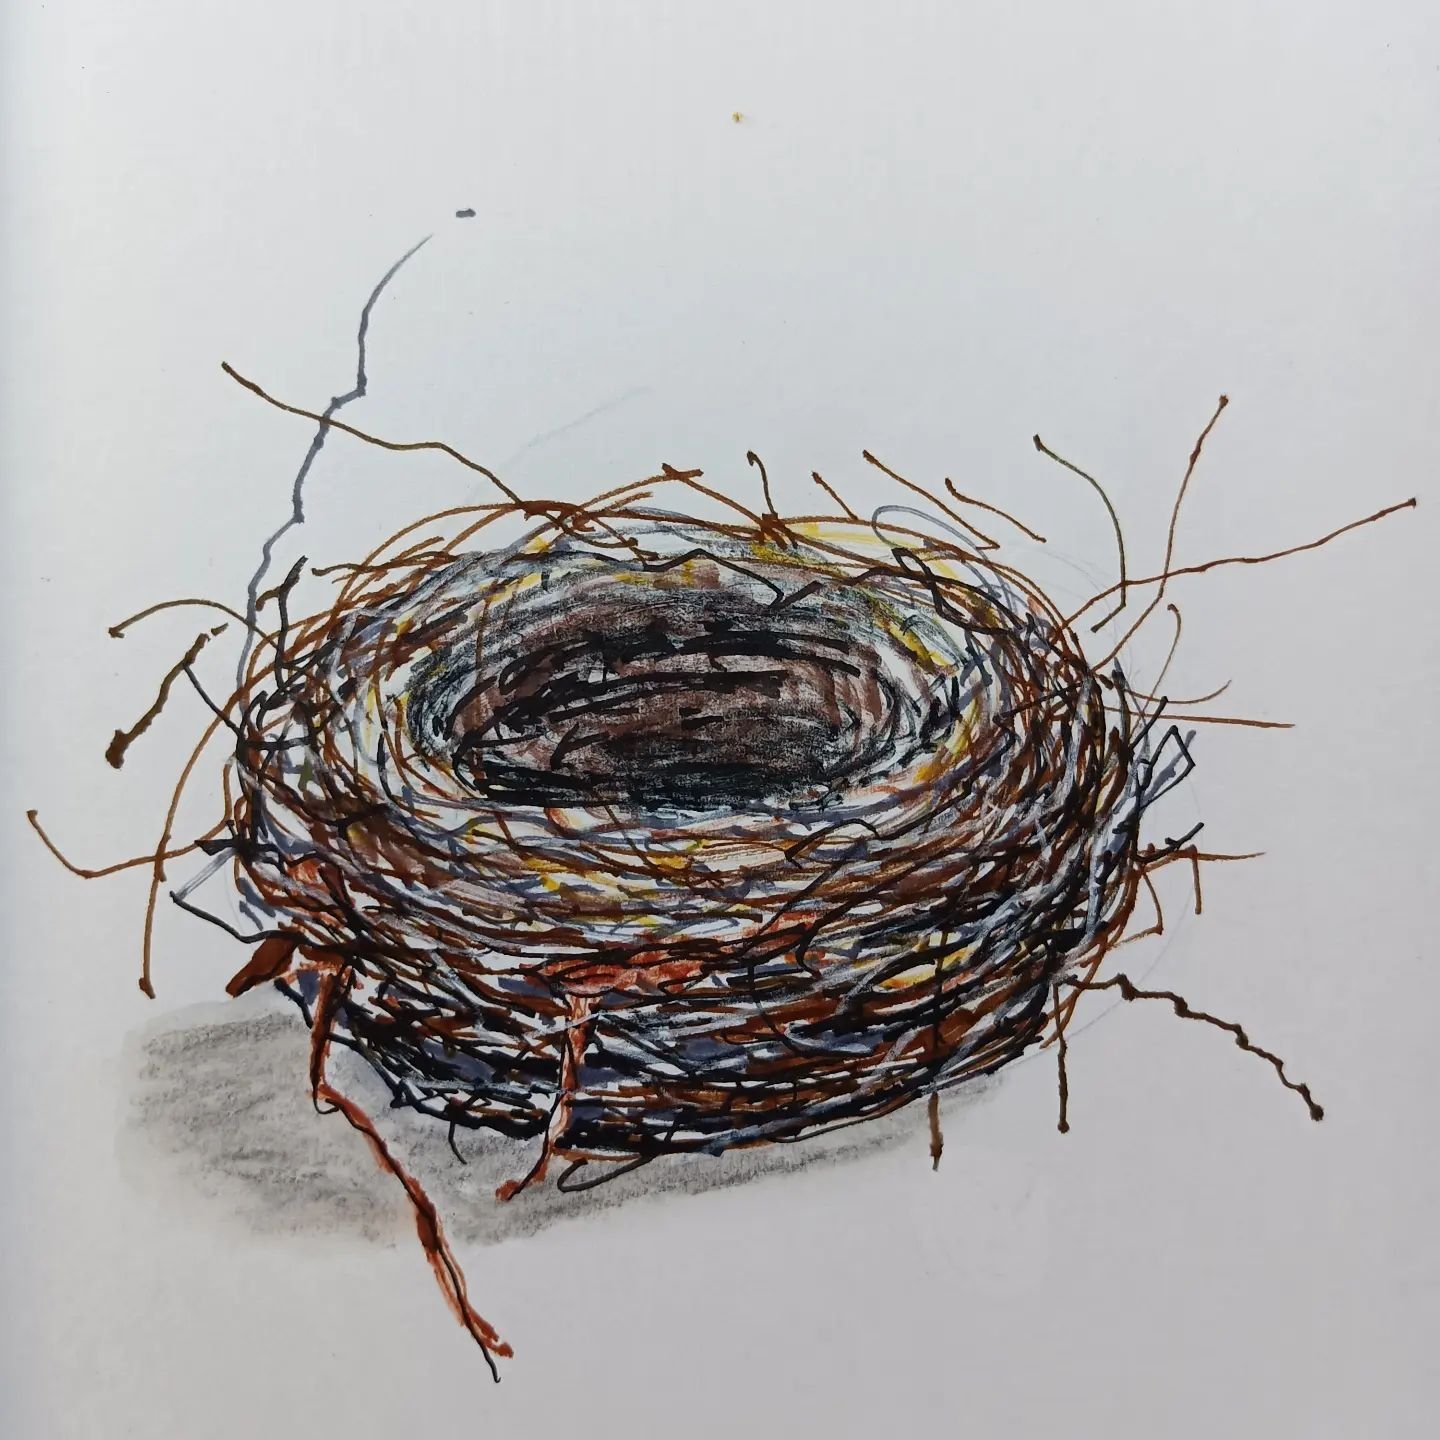 DAY 80 #the100dayproject . Empty nest. Marker pens.

#the100dayproject2024 
#dothe100dayproject 
#markerpen 
#emptynest 
#diananeggoartist